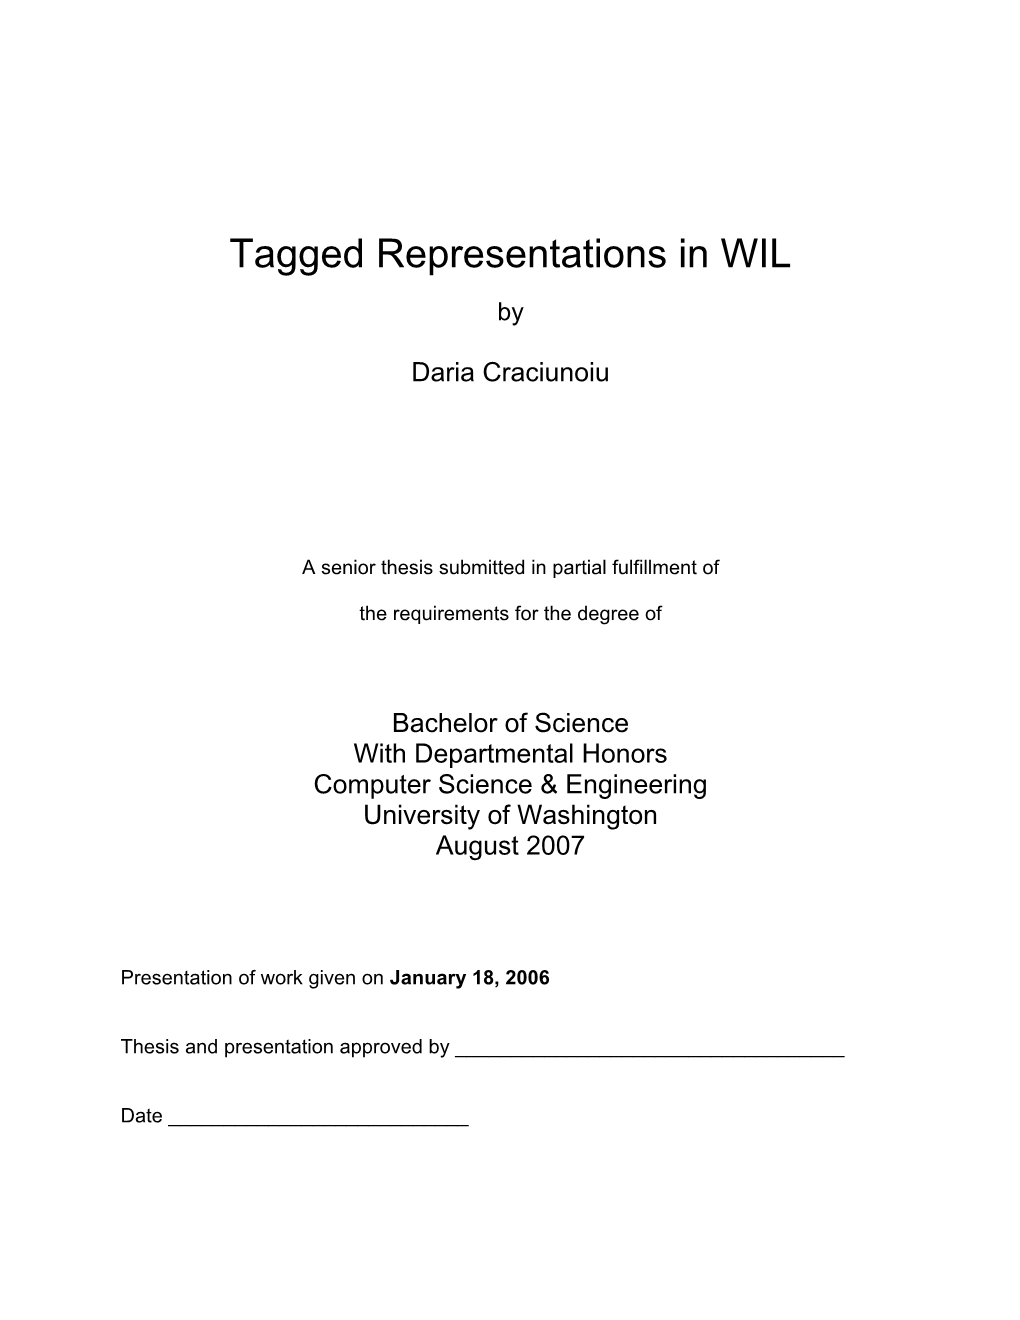 Tagged Representations in WIL